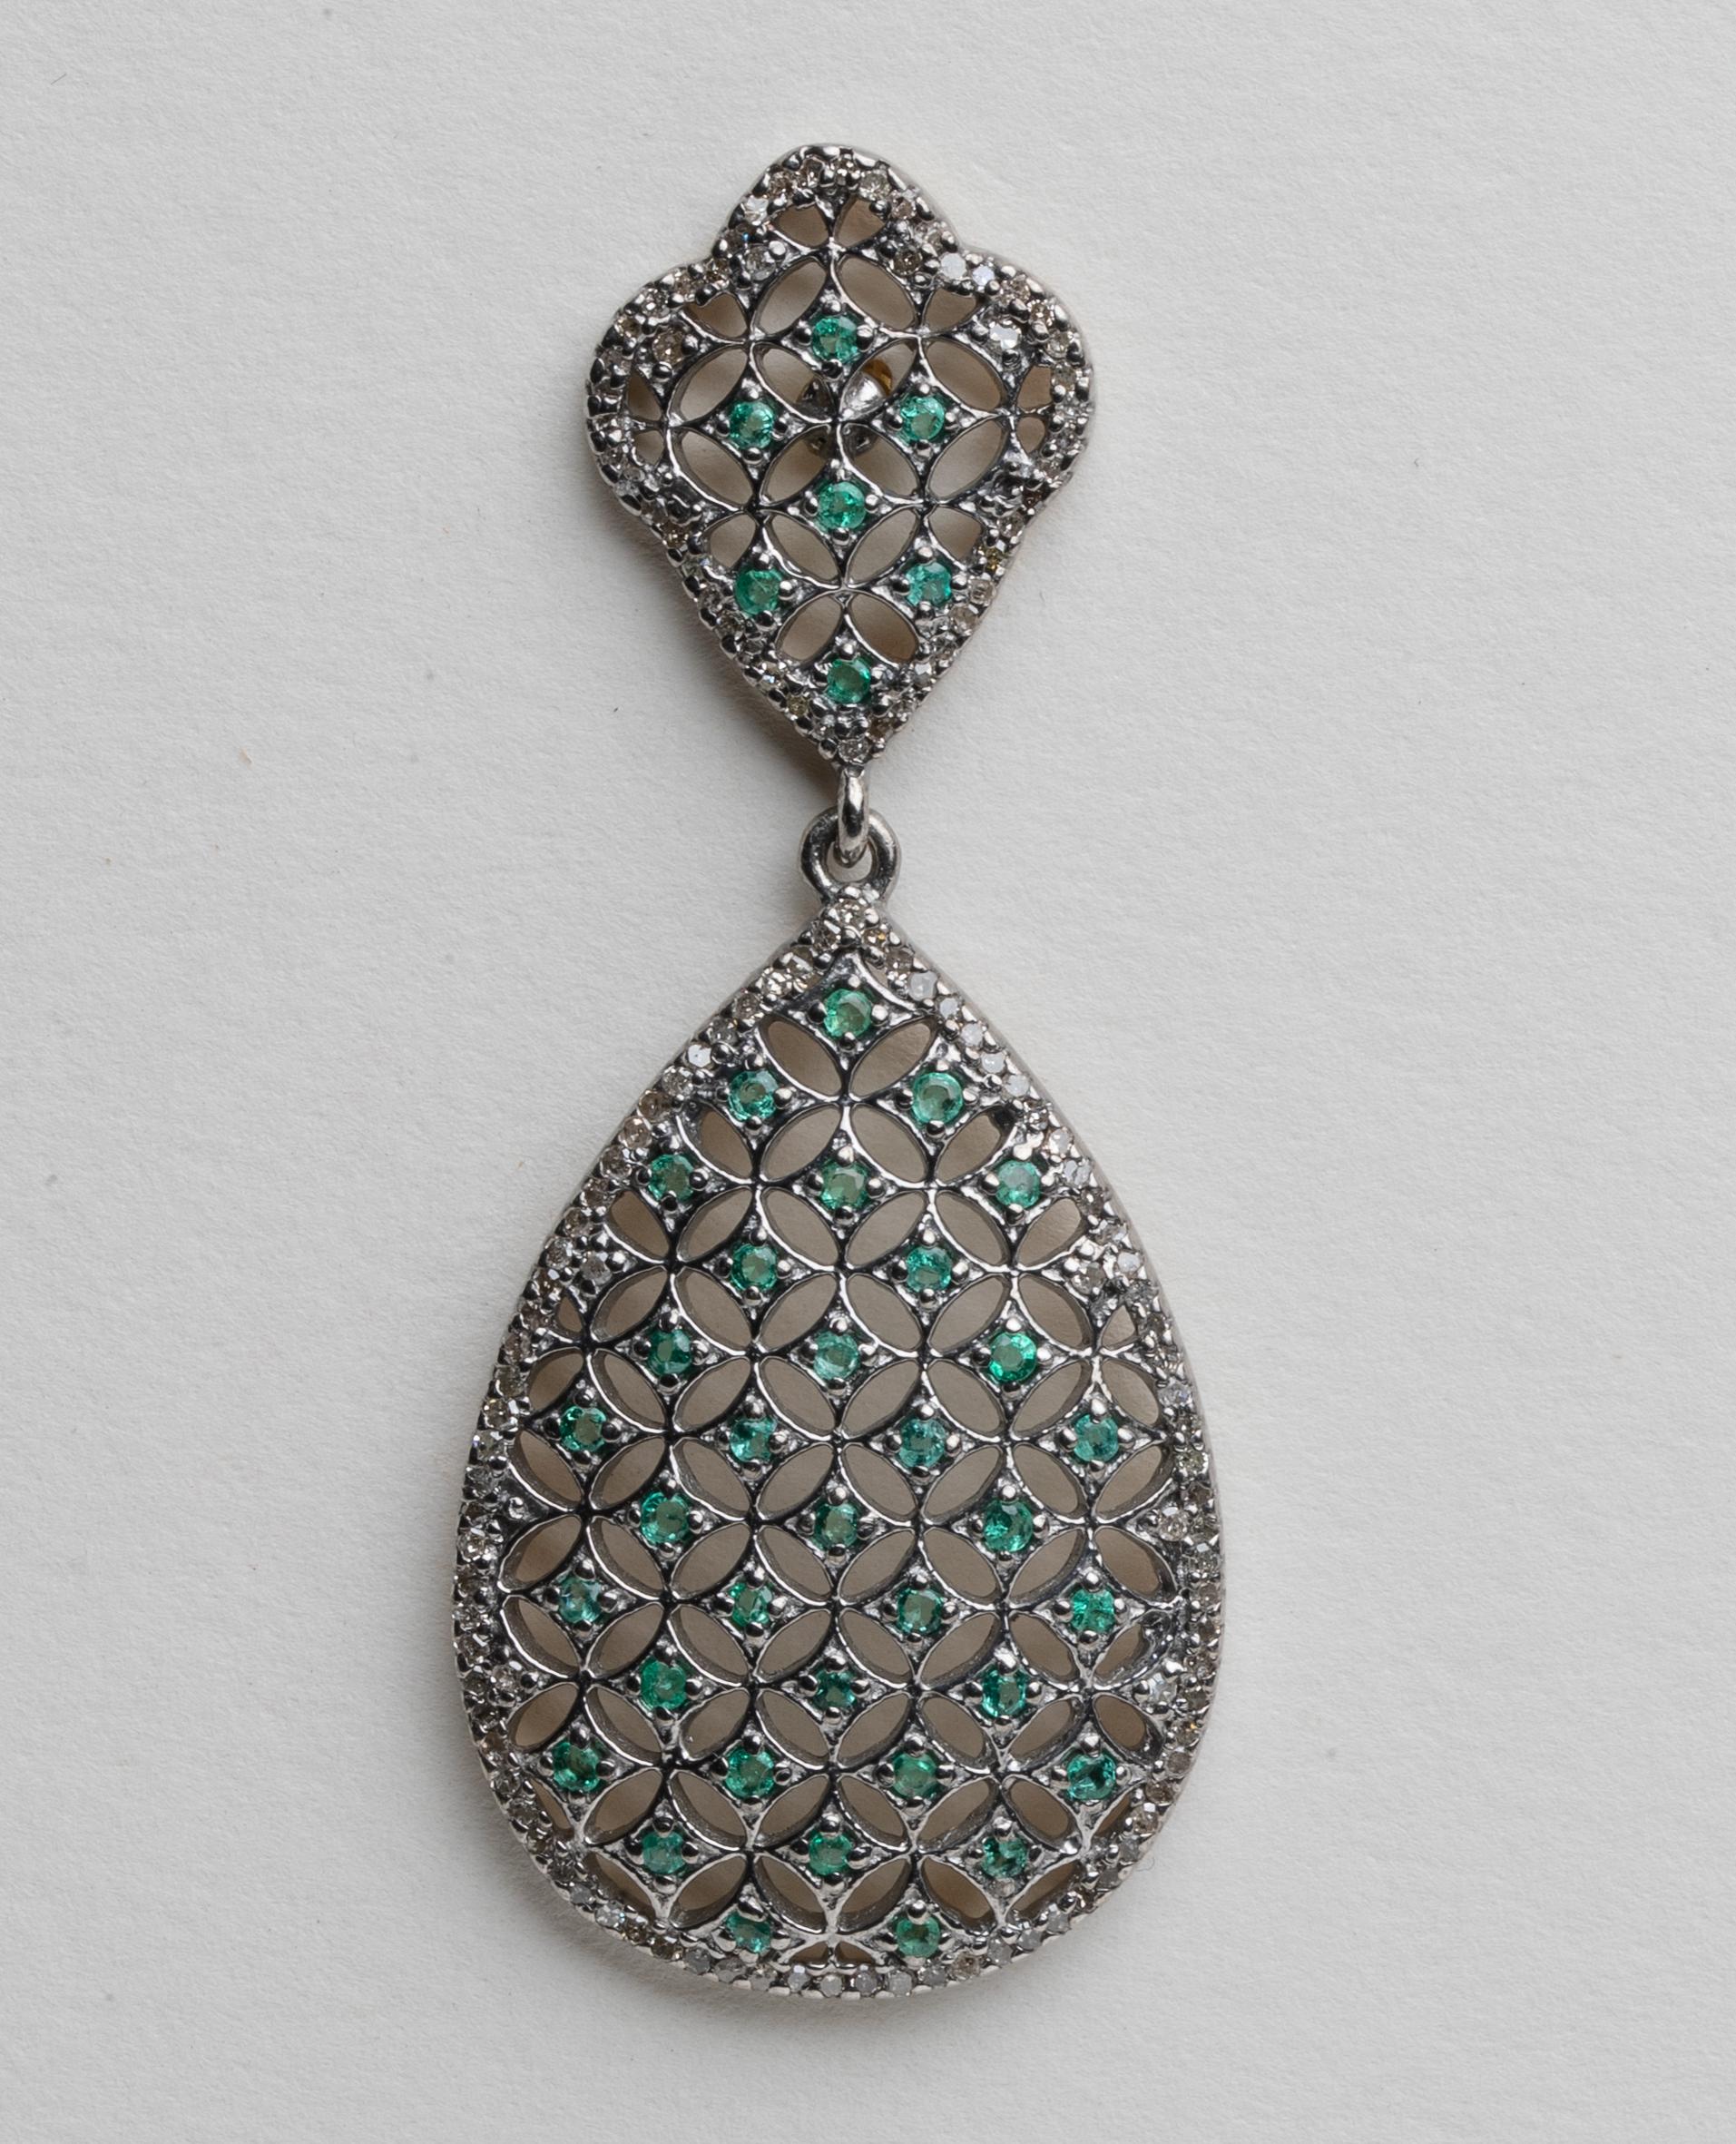 A pair of lovely lattice-work earrings with round faceted emeralds bordered with round, brilliant cut diamonds in a pave` setting.  Set in sterling silver, post is 18K gold for pierced ears.